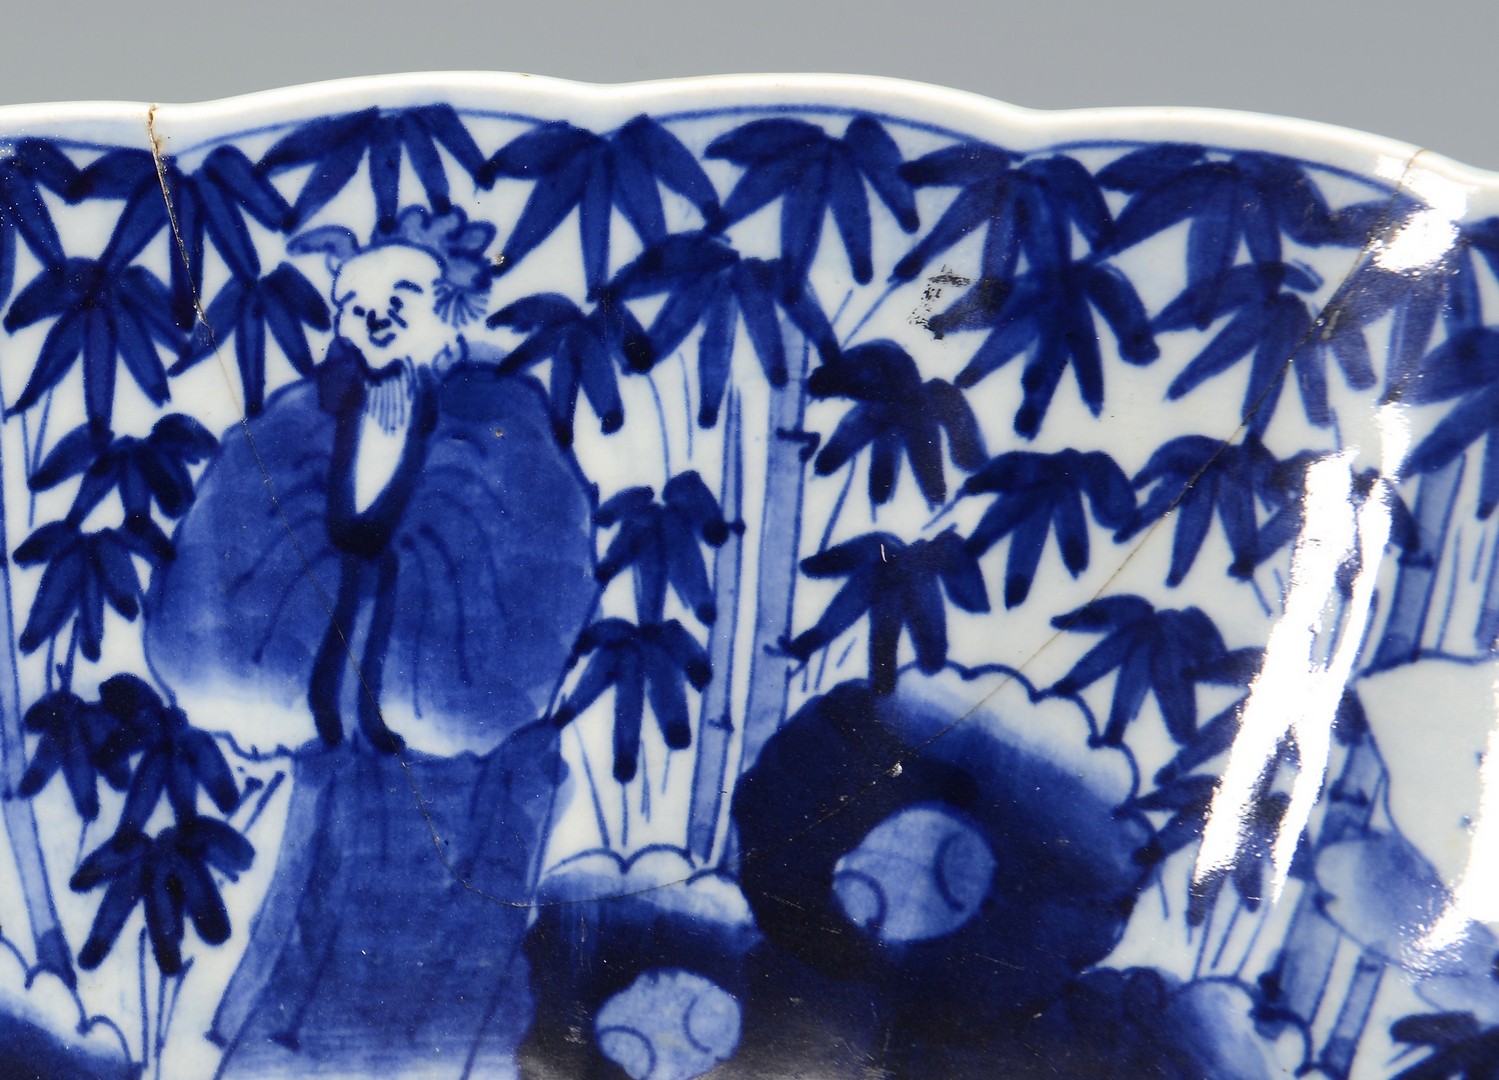 Lot 716: Chinese blue and white punch bowl, 19th c.